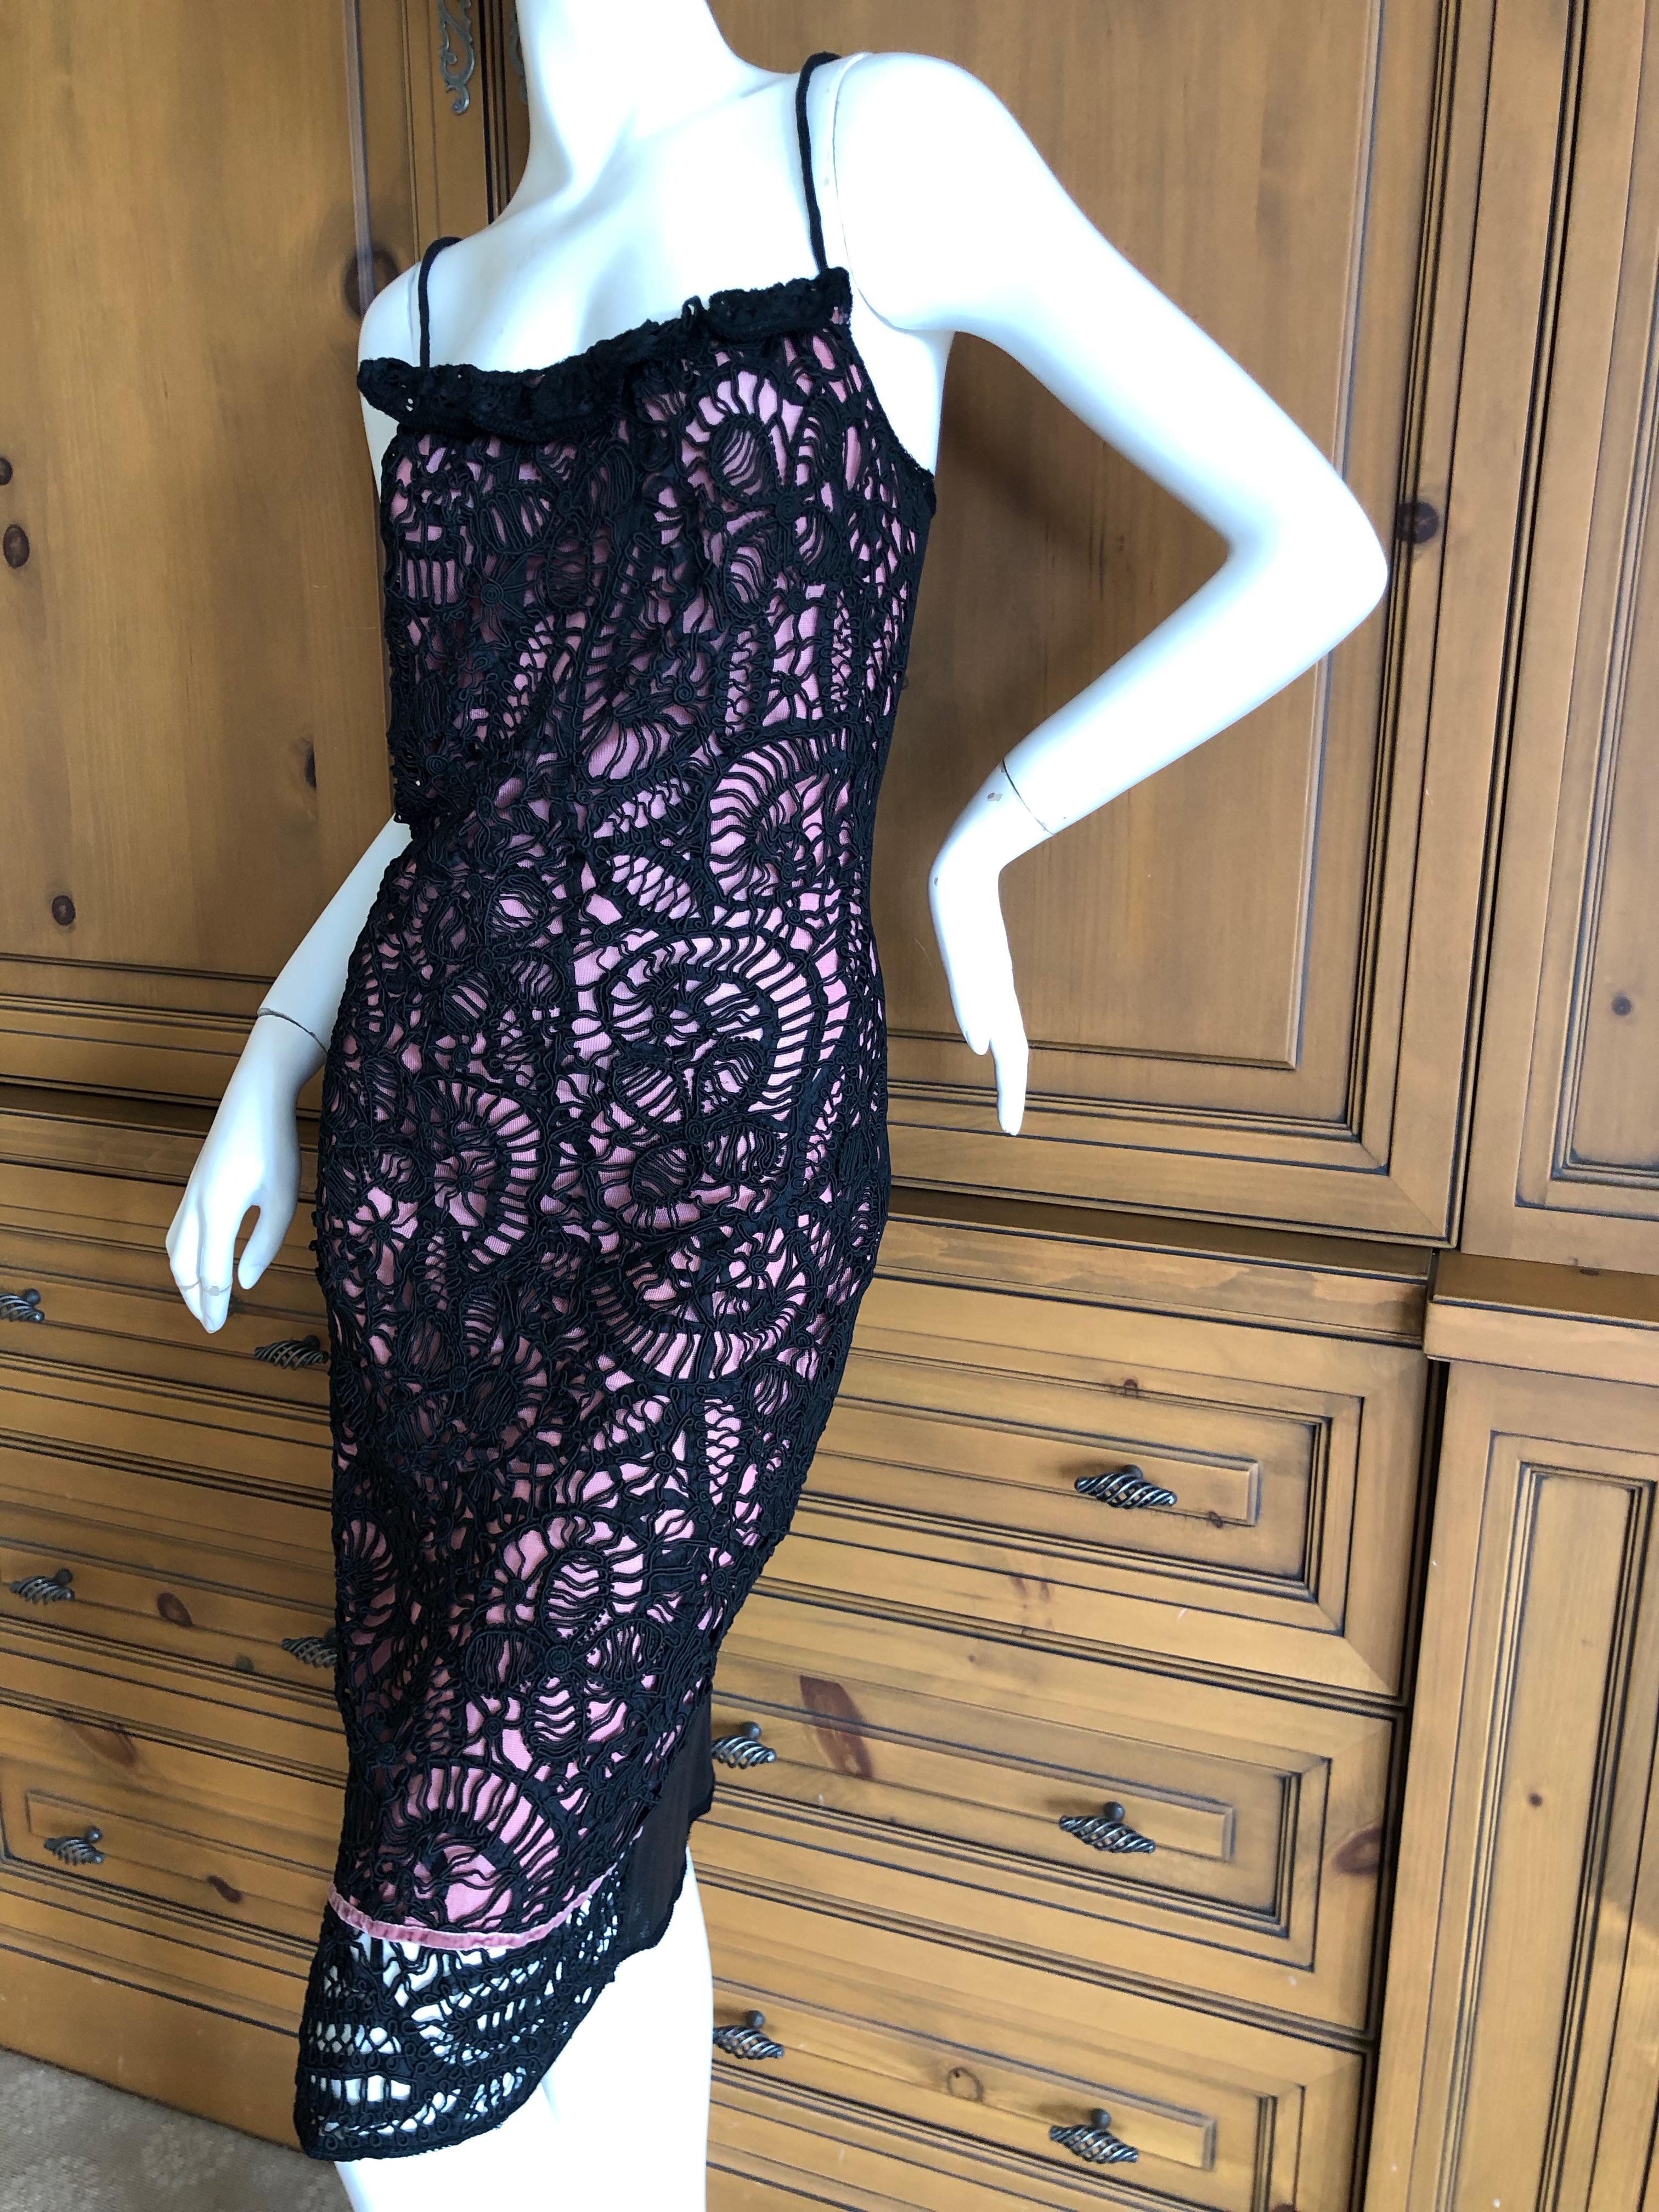 Women's John Galliano Unusual 1990's Black Lace over Pale Pink Overlay Cocktail Dress For Sale